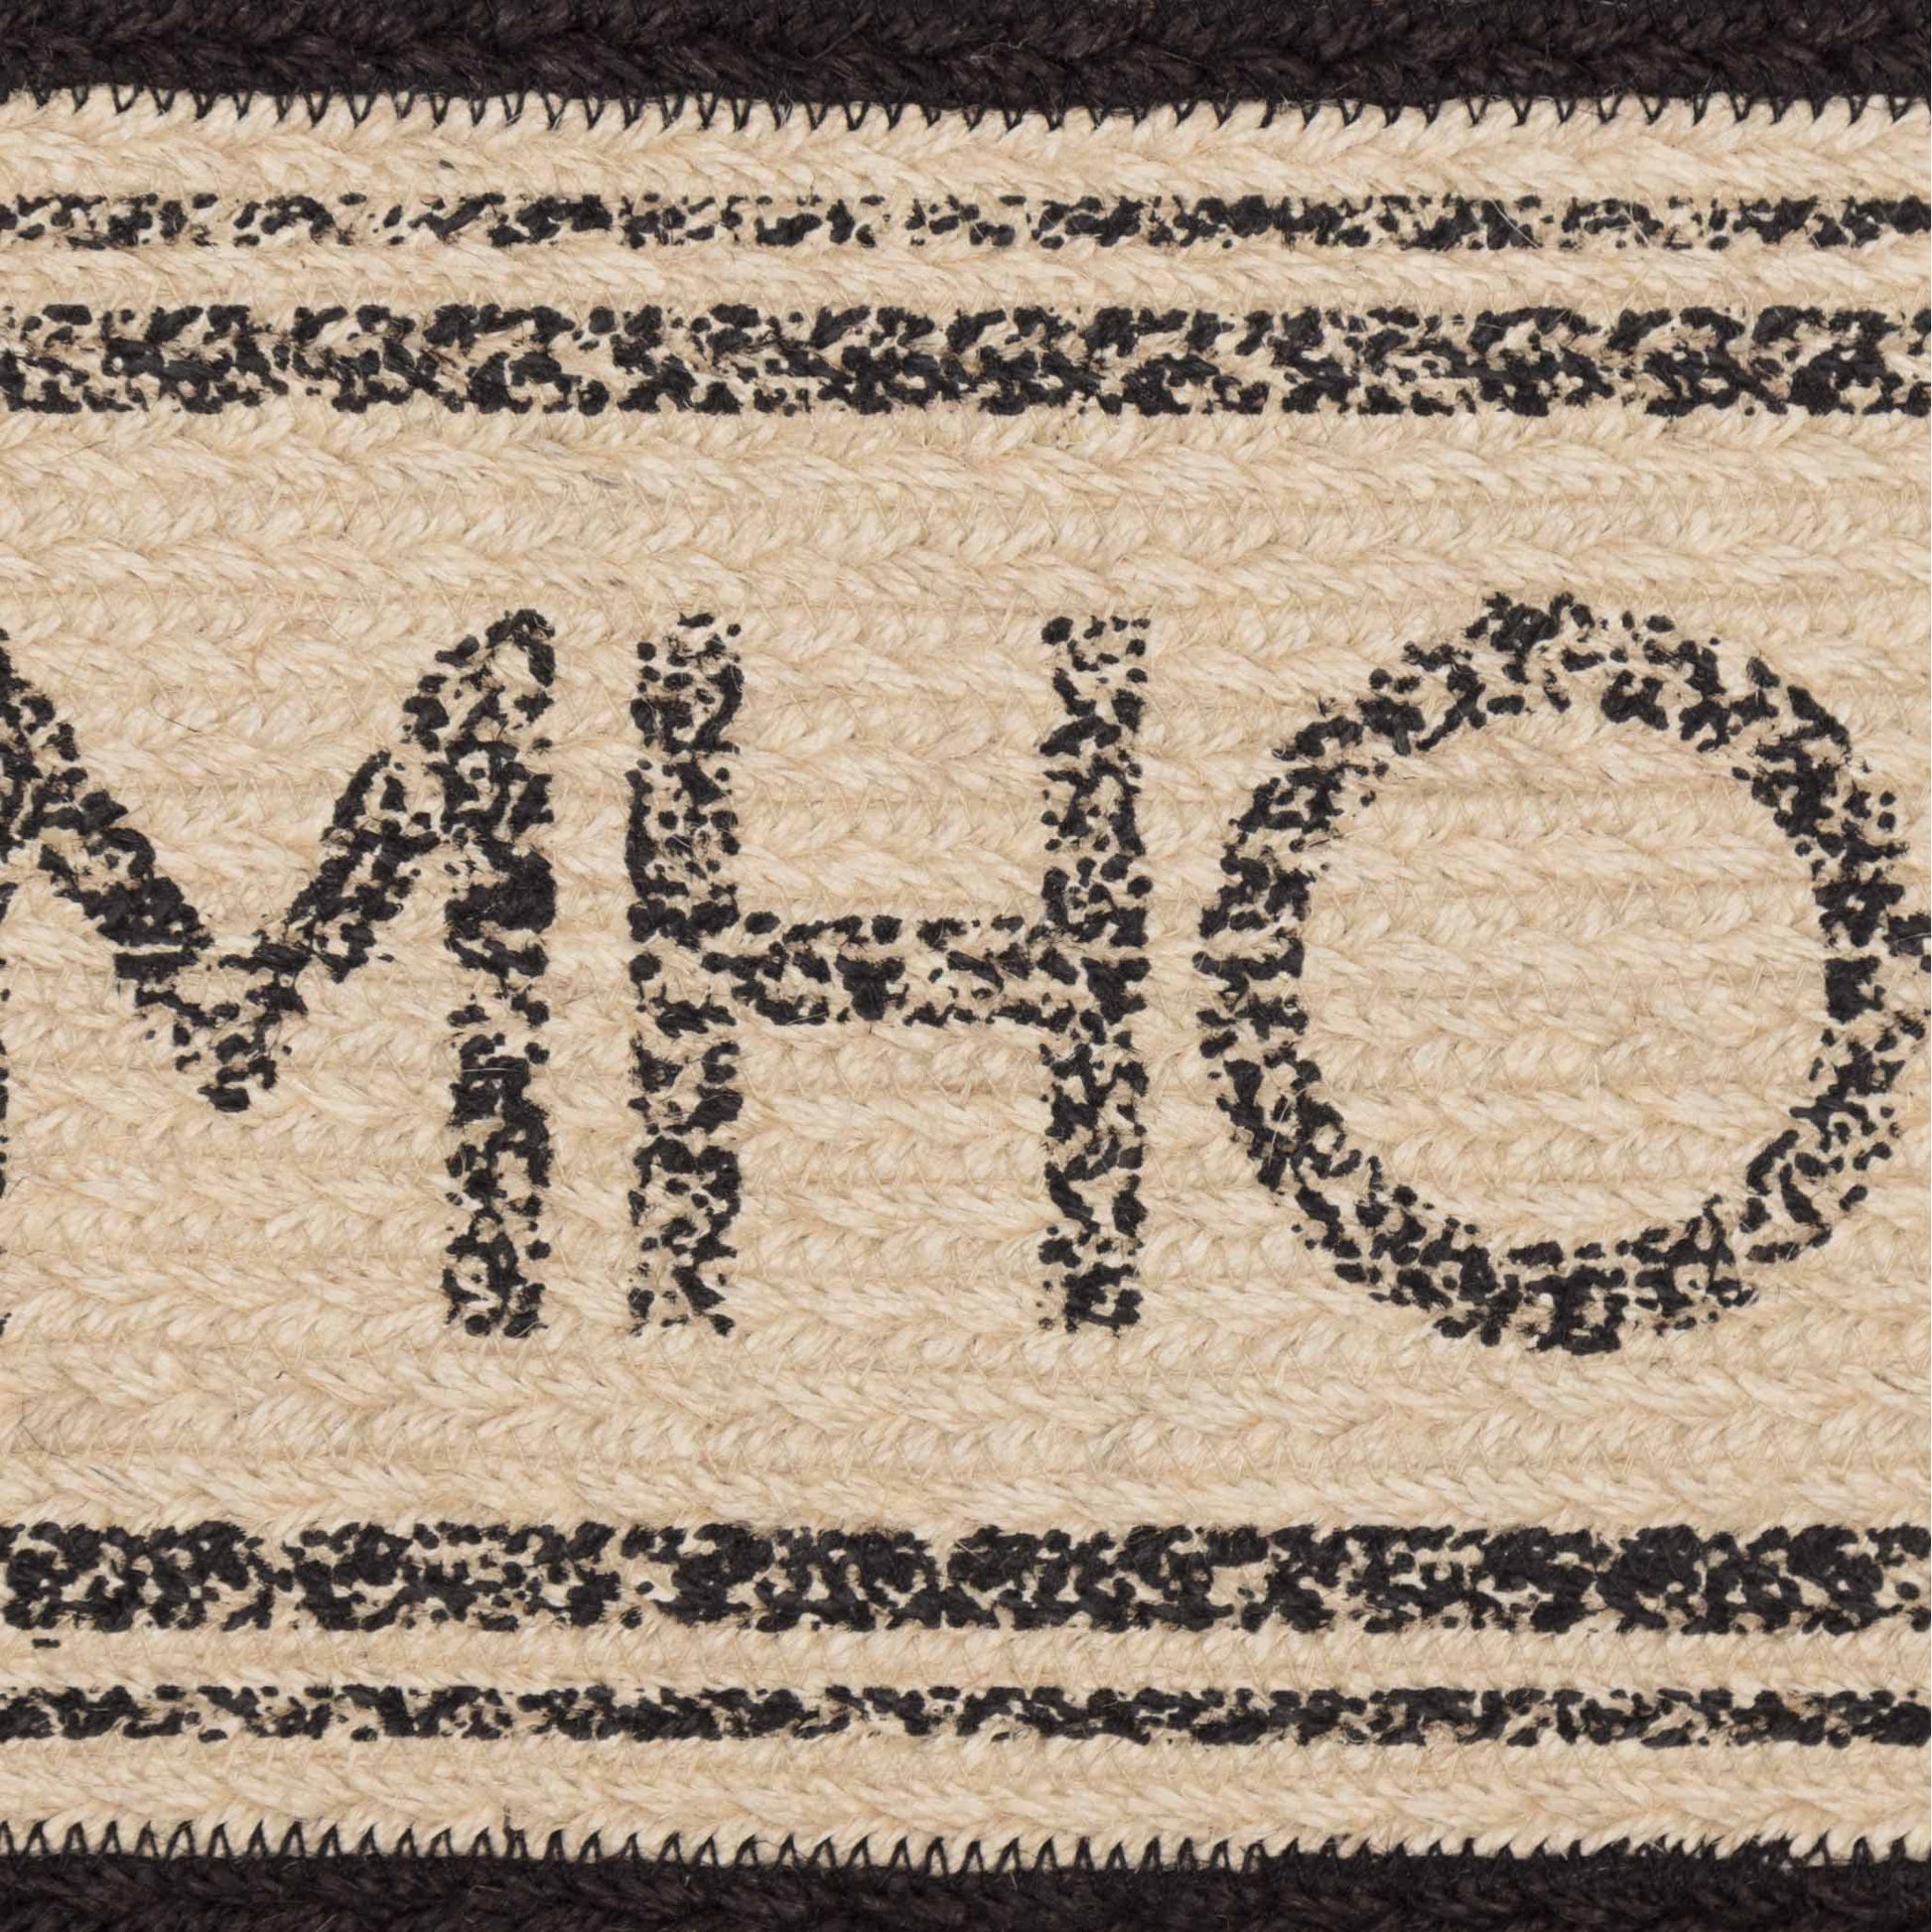 45735-Sawyer-Mill-Charcoal-Creme-Farmhouse-Jute-Oval-Runner-8x24-image-5